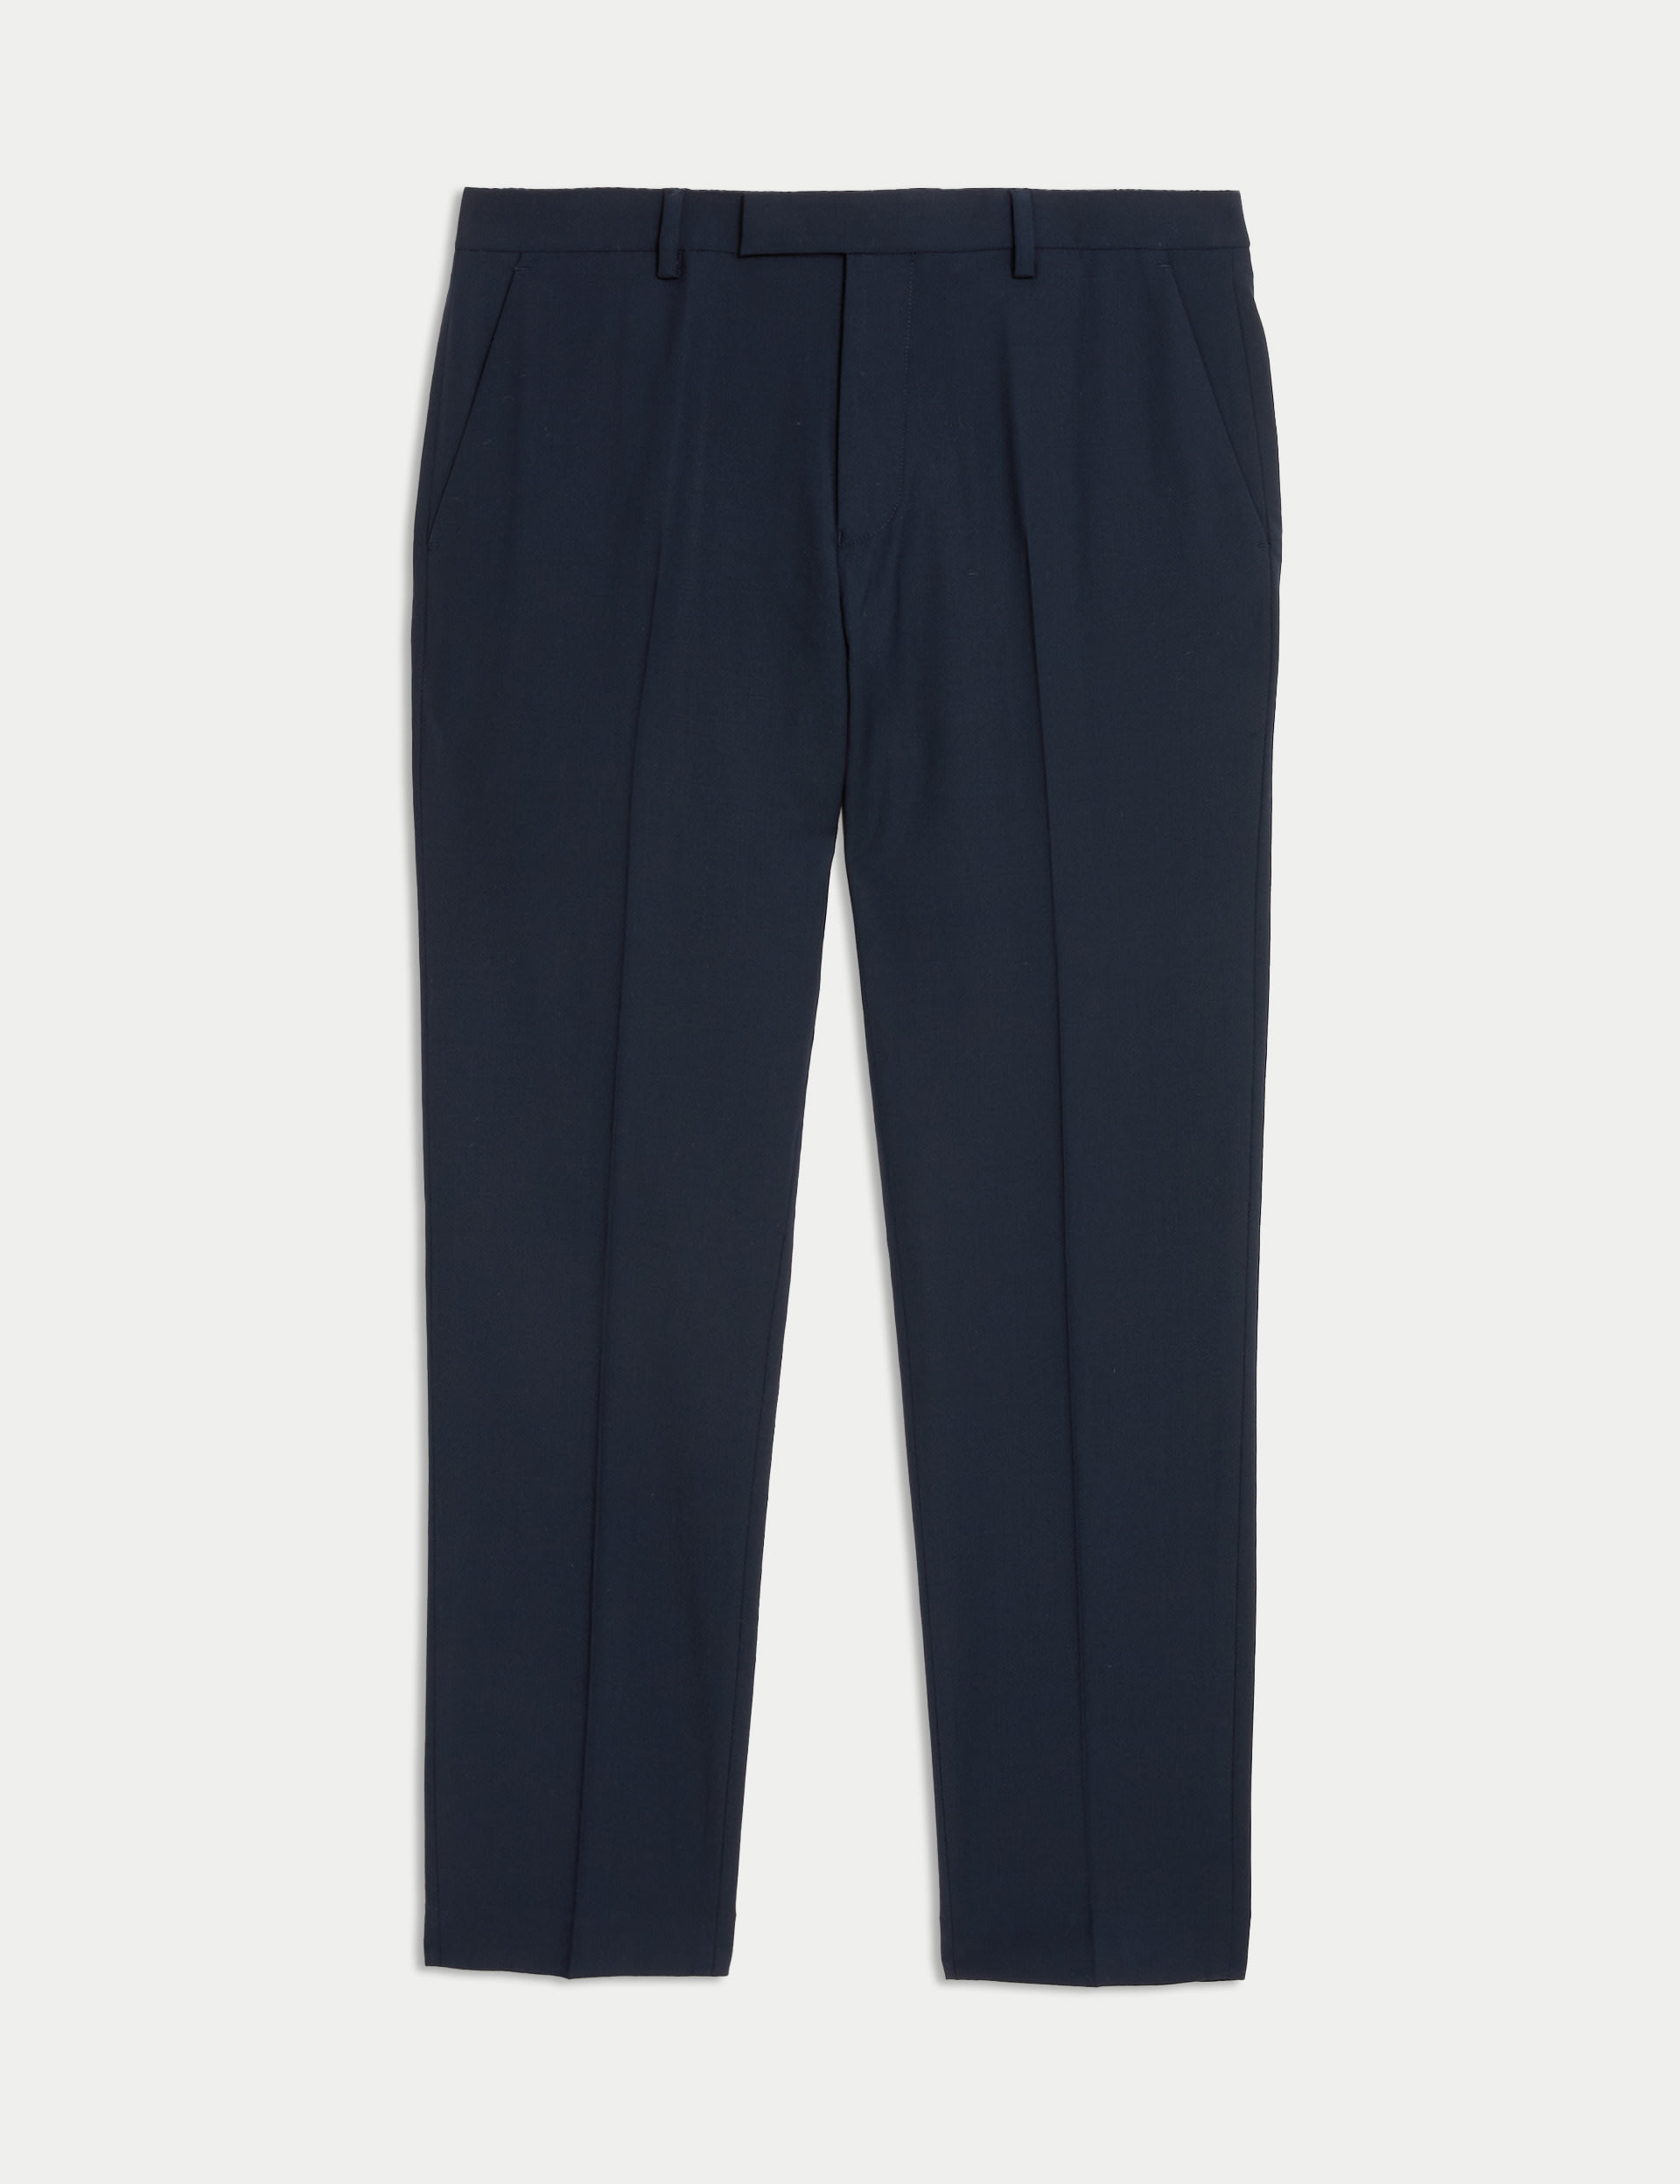 Slim Fit Performance Stretch Suit Trousers